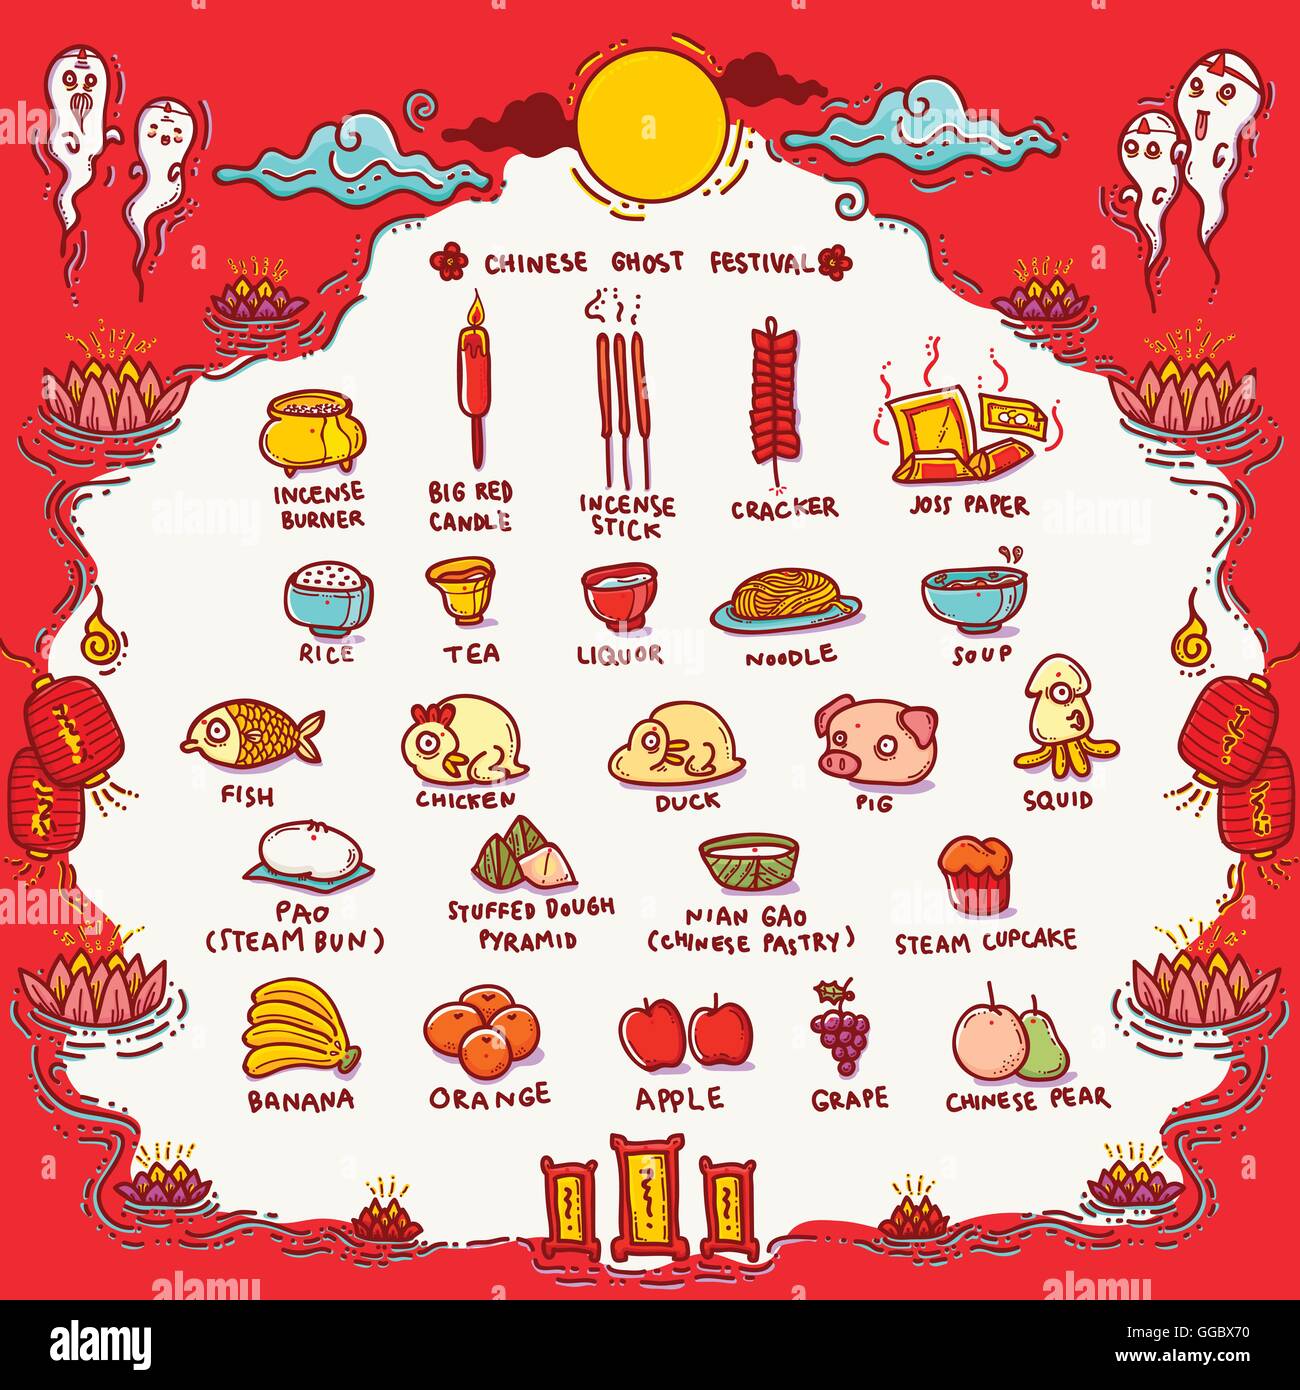 Vector Illustration of Chinese Ghost Offres Festival.le chinois traditionnel connu sous le nom de Hungry Ghost Festival. Illustration de Vecteur